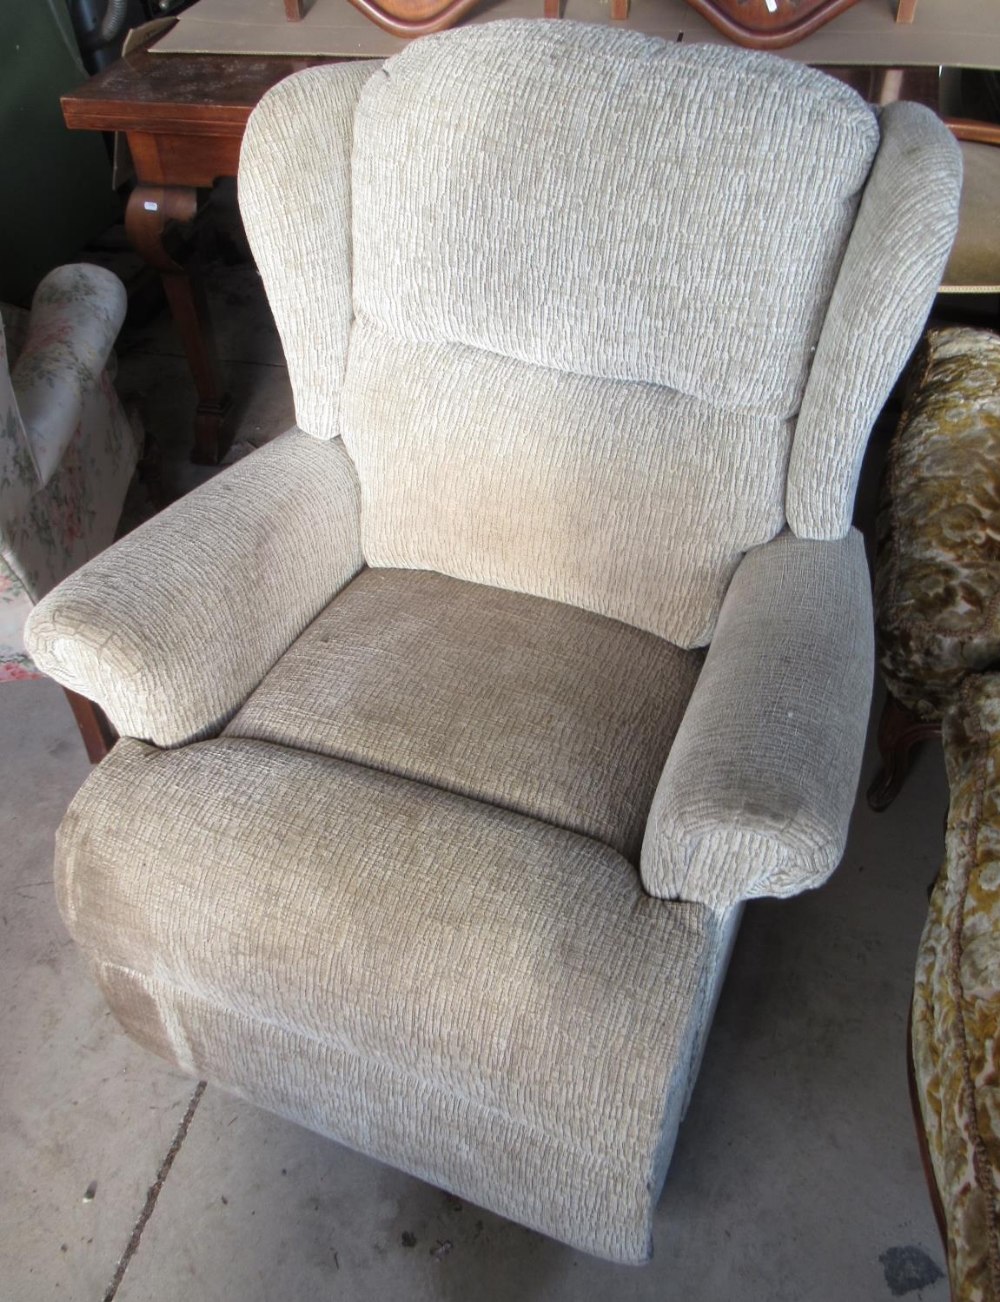 WITHDRAWN - Sherbourne electric recliner armchair (untested)